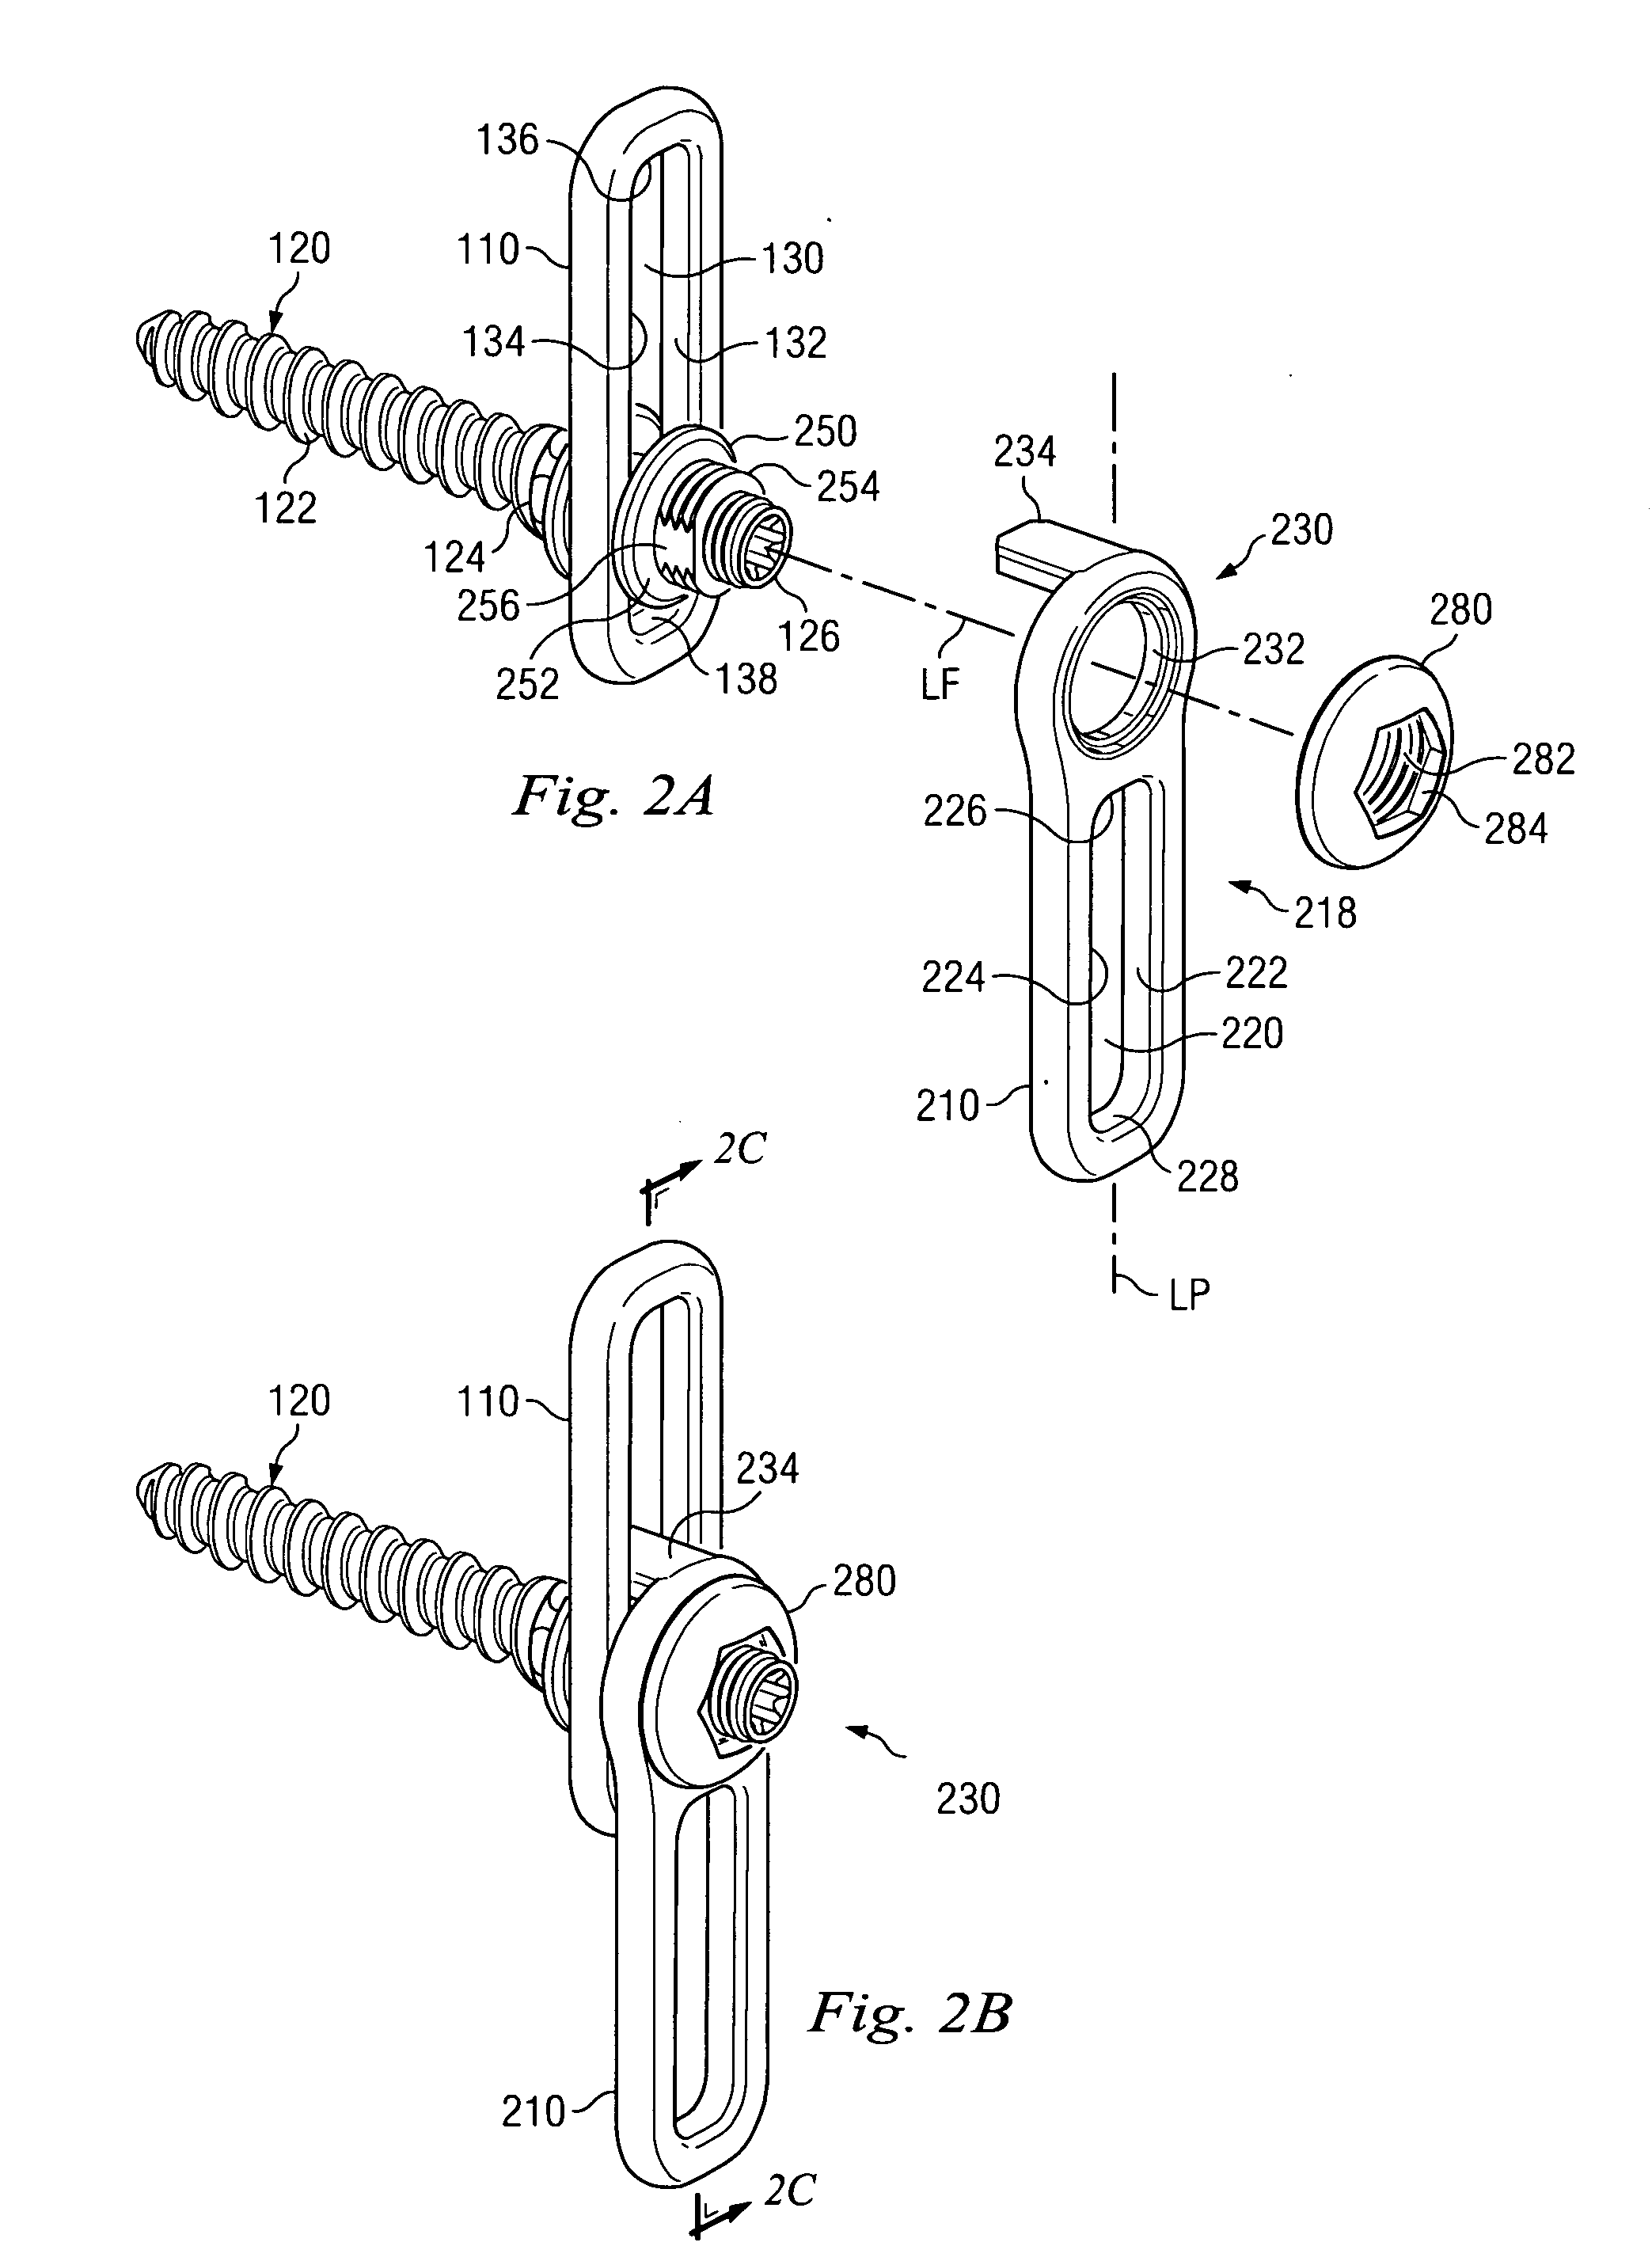 Revision fixation plate and method of use